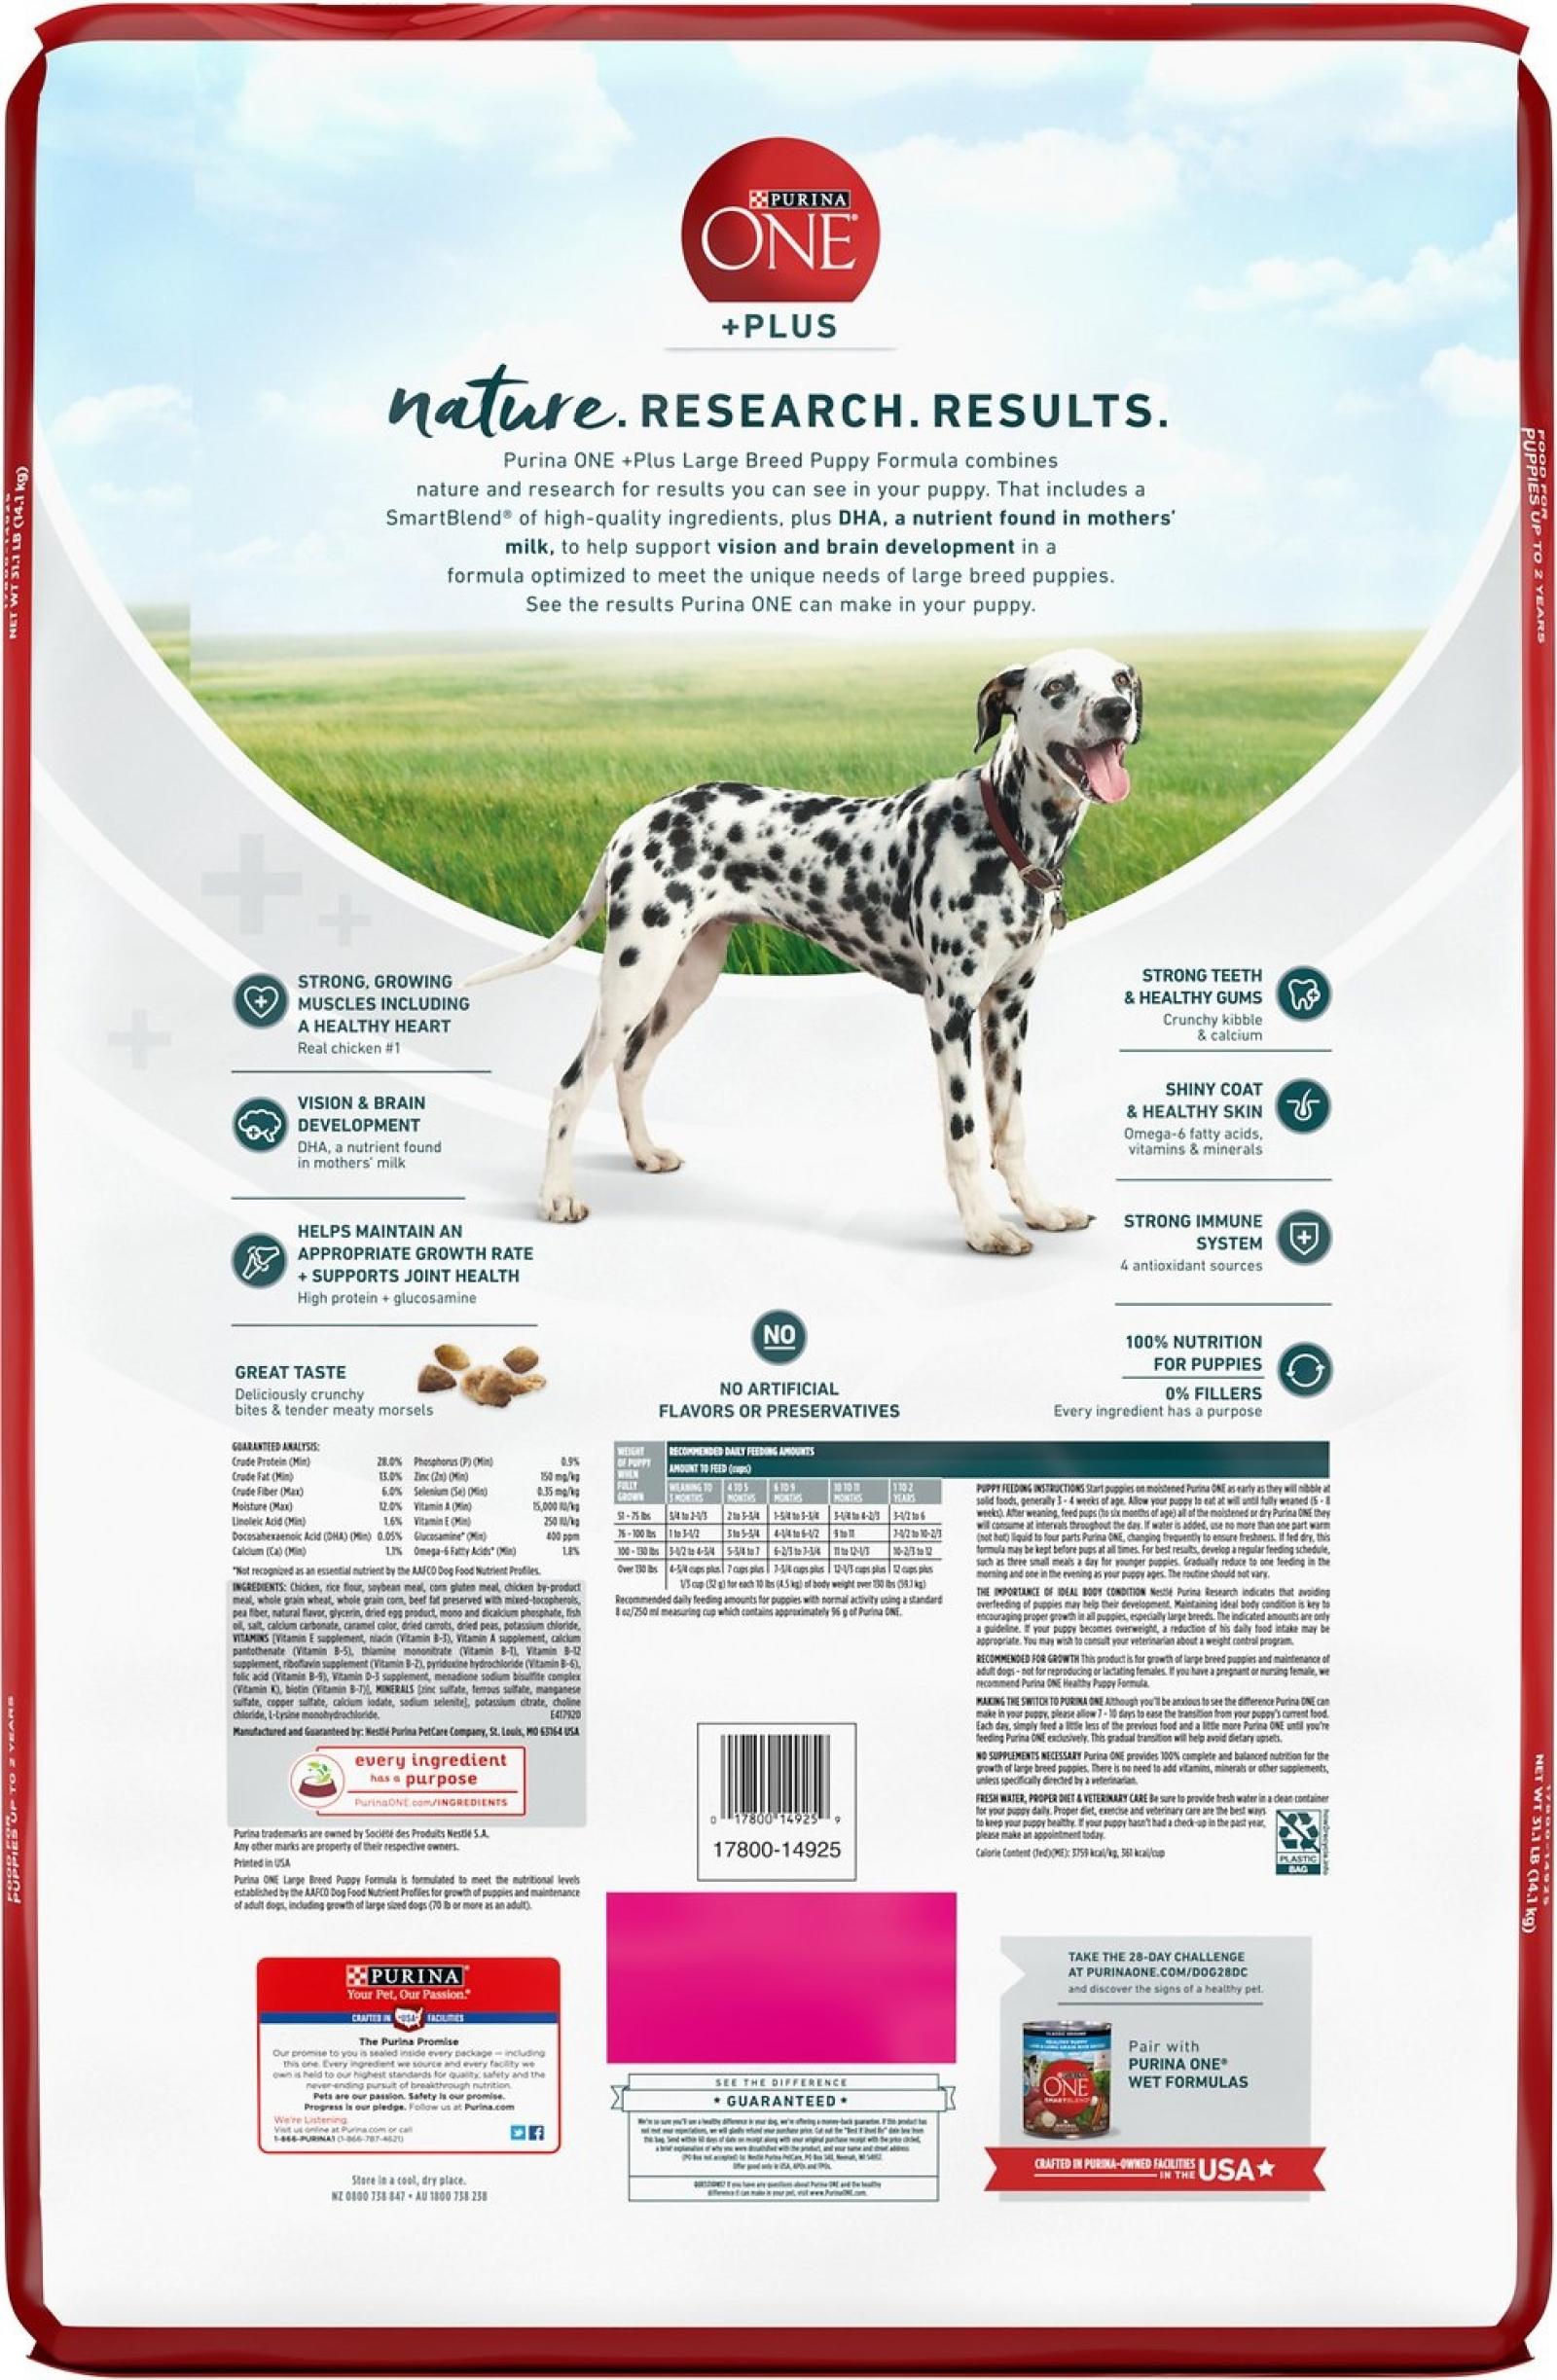 Purina One +Plus Puppy Large Breed Formula